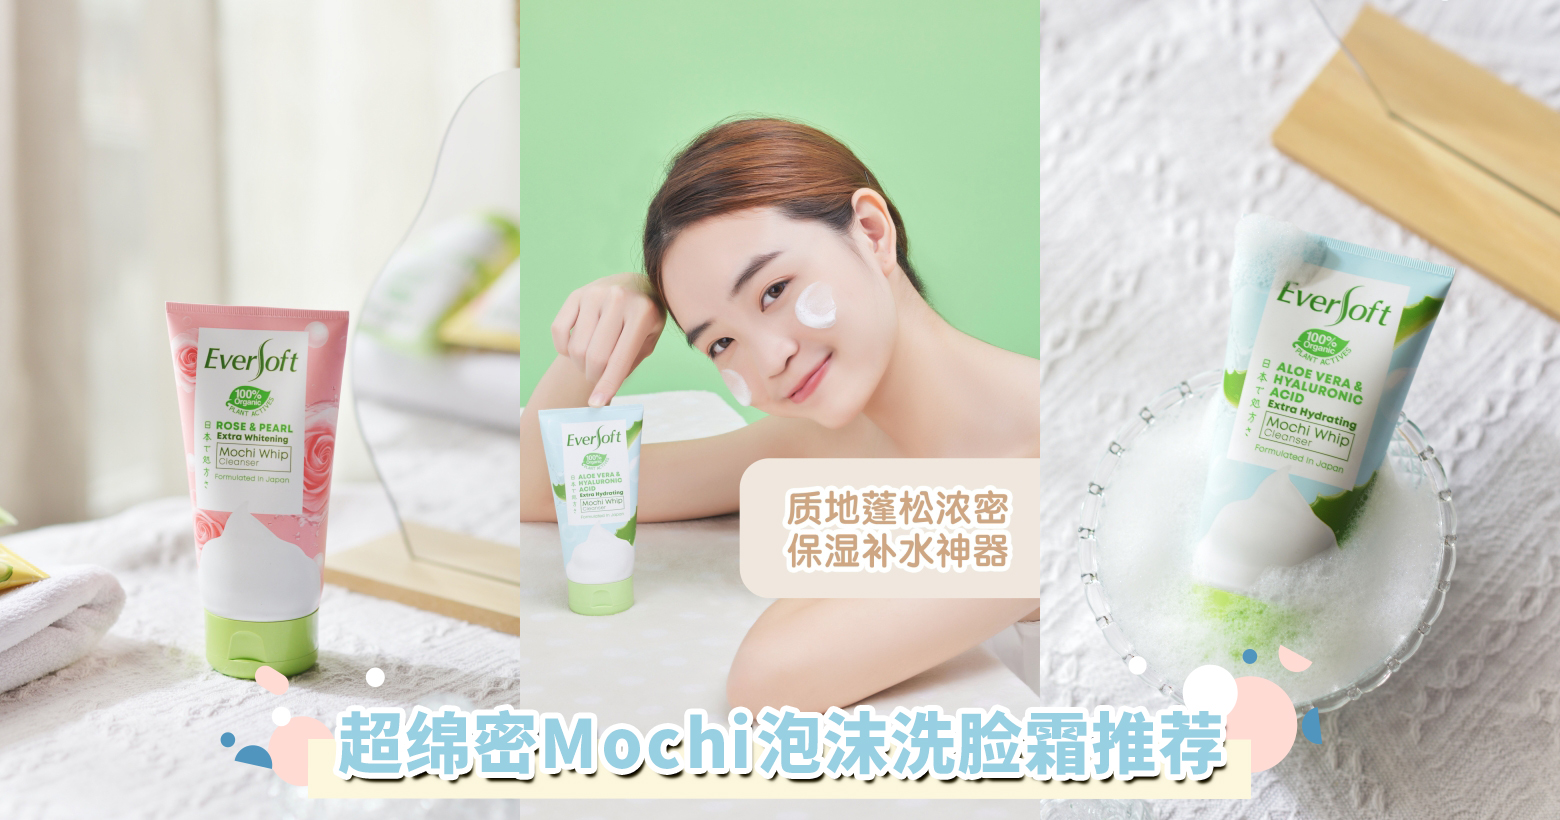 EVERSOFT MOCHI WHIP CLEANSER